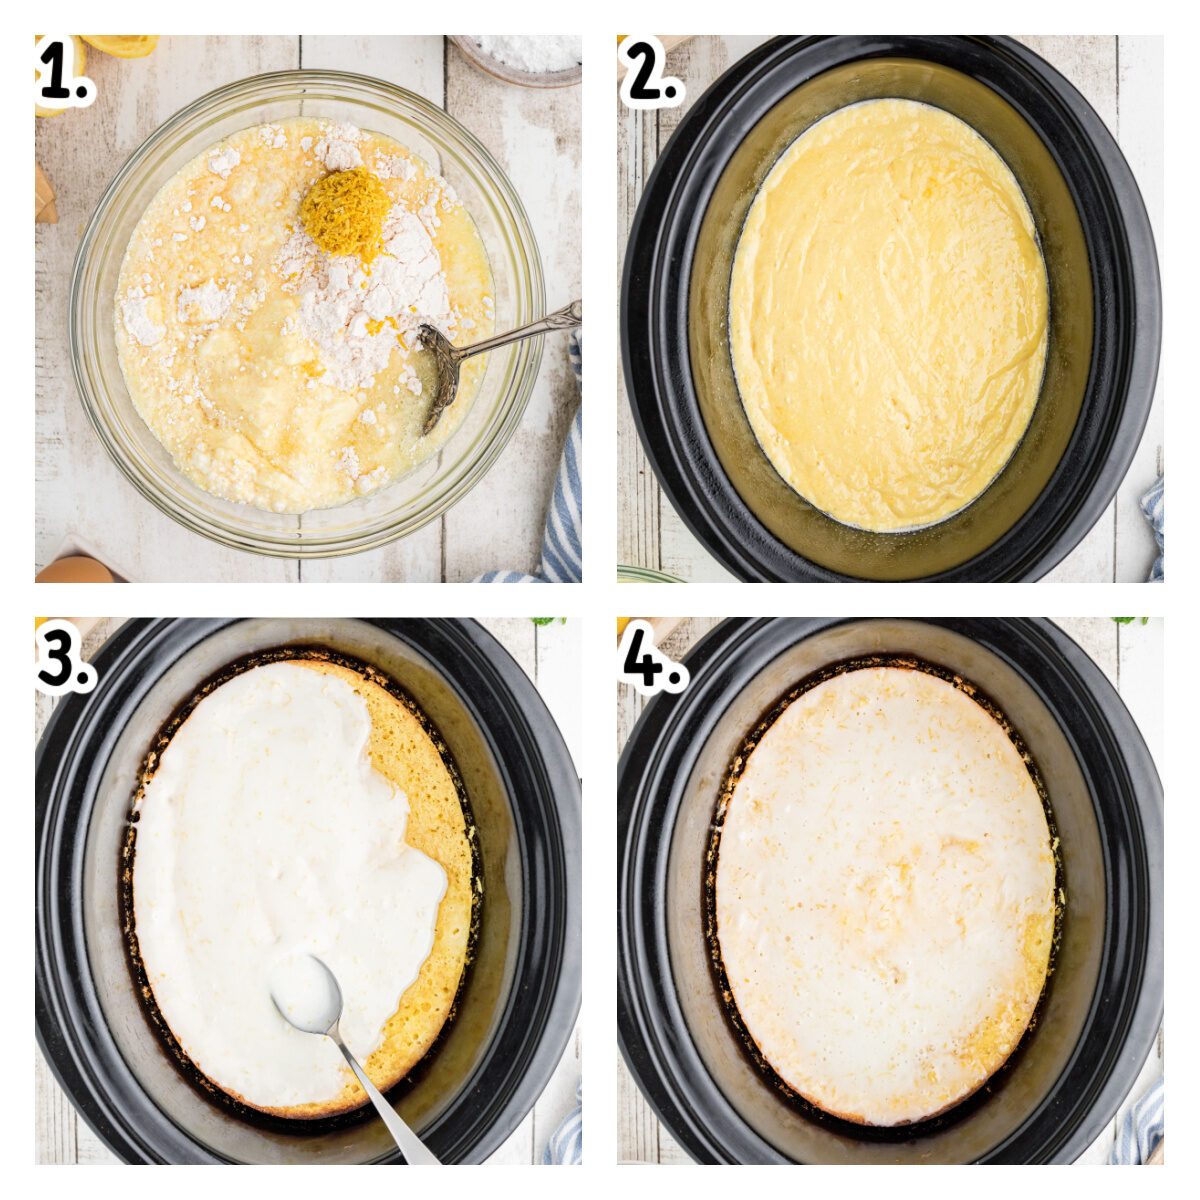 Four images showing how to make lemon spoon cake in a slow cooker.